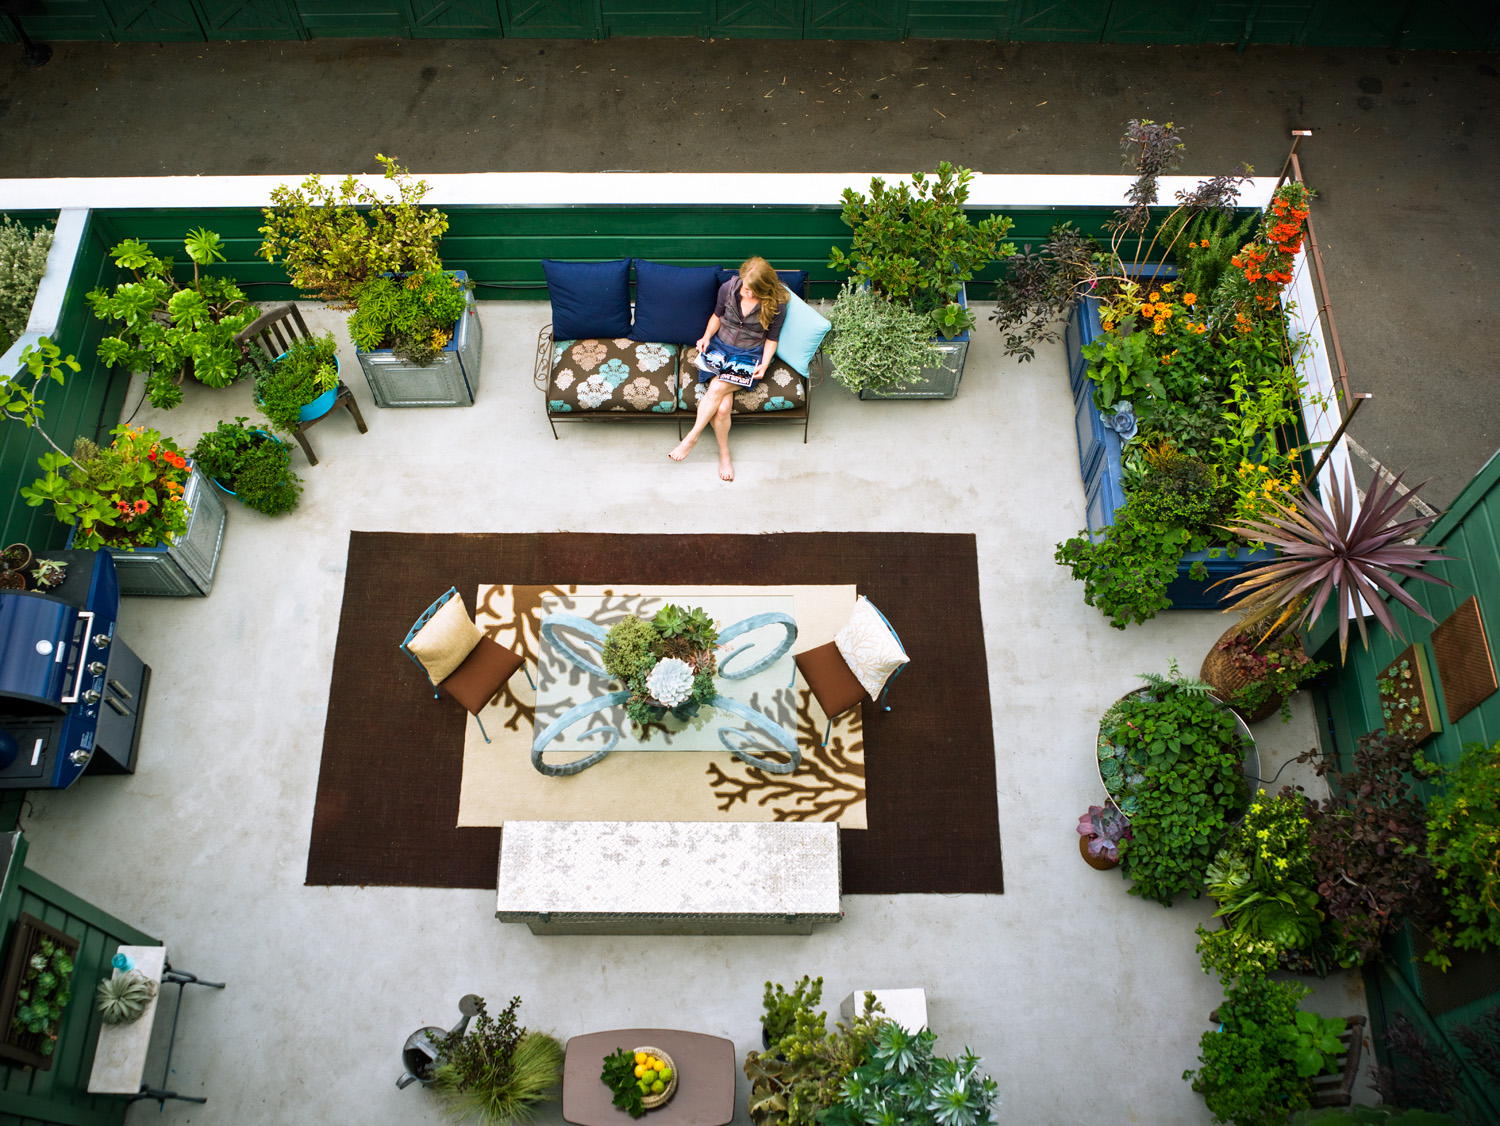 is your yard or garden small on space? get big ideas for making the